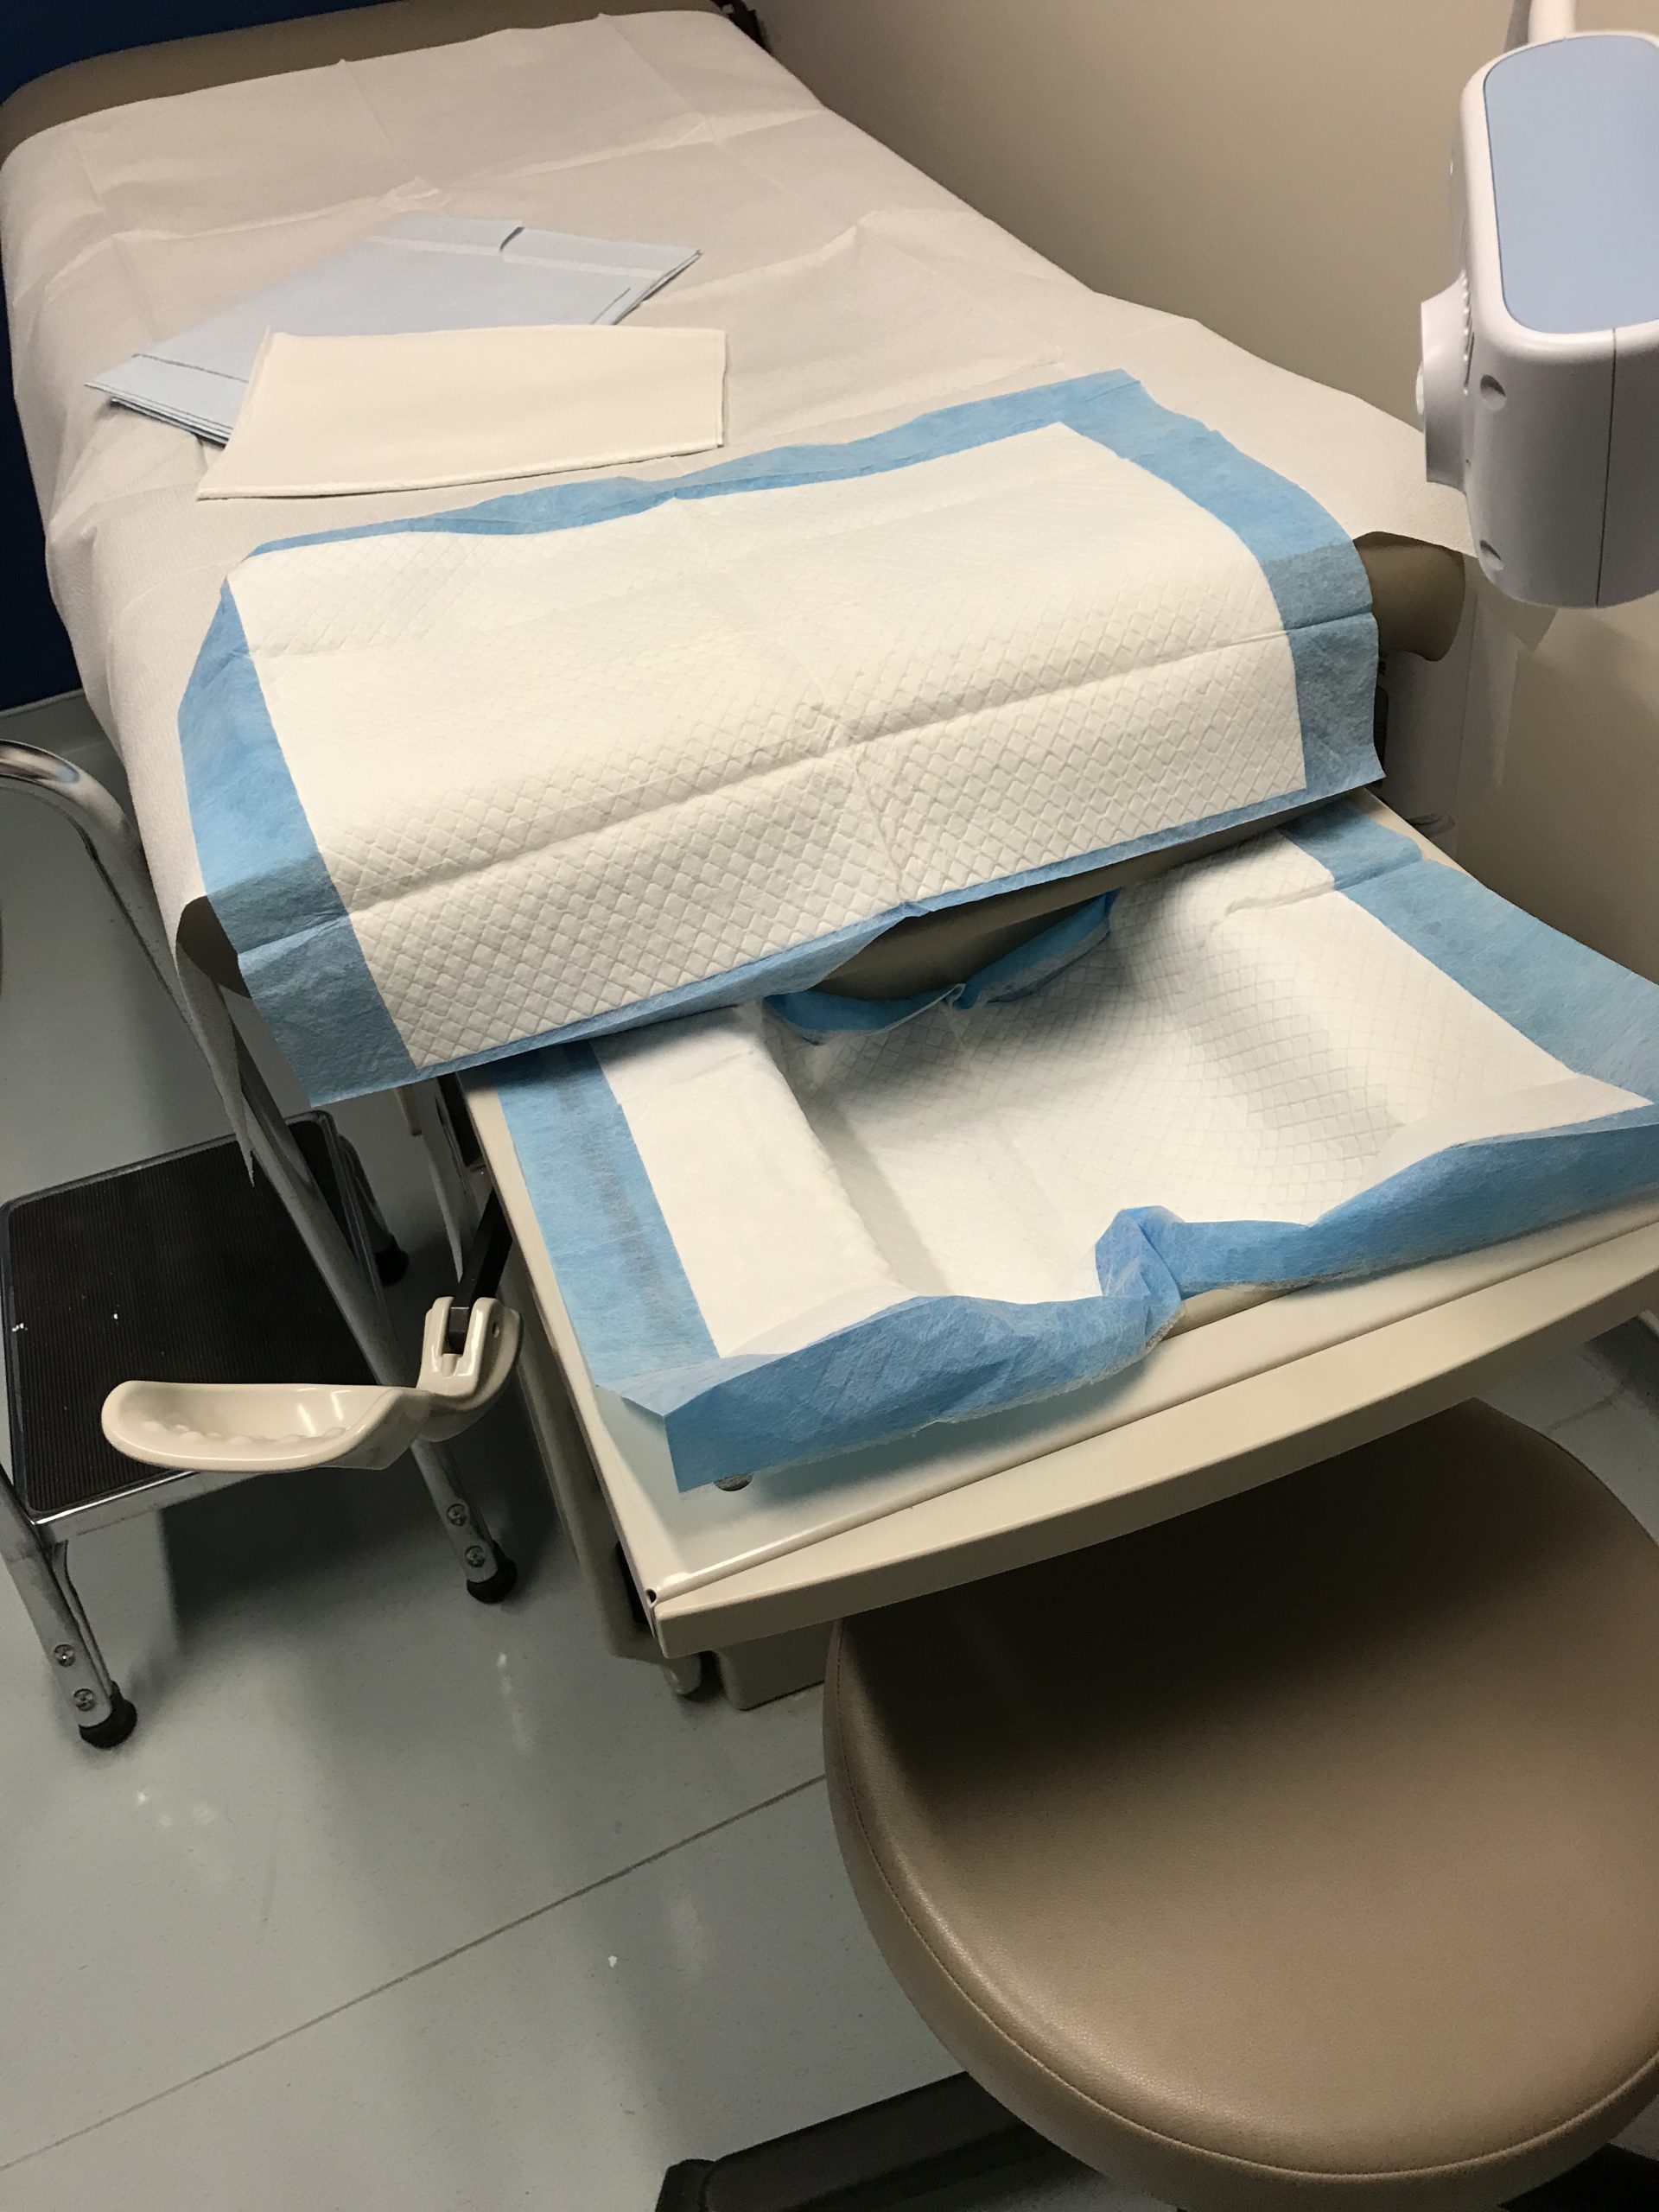 Fully prepared examination bed with stirrups